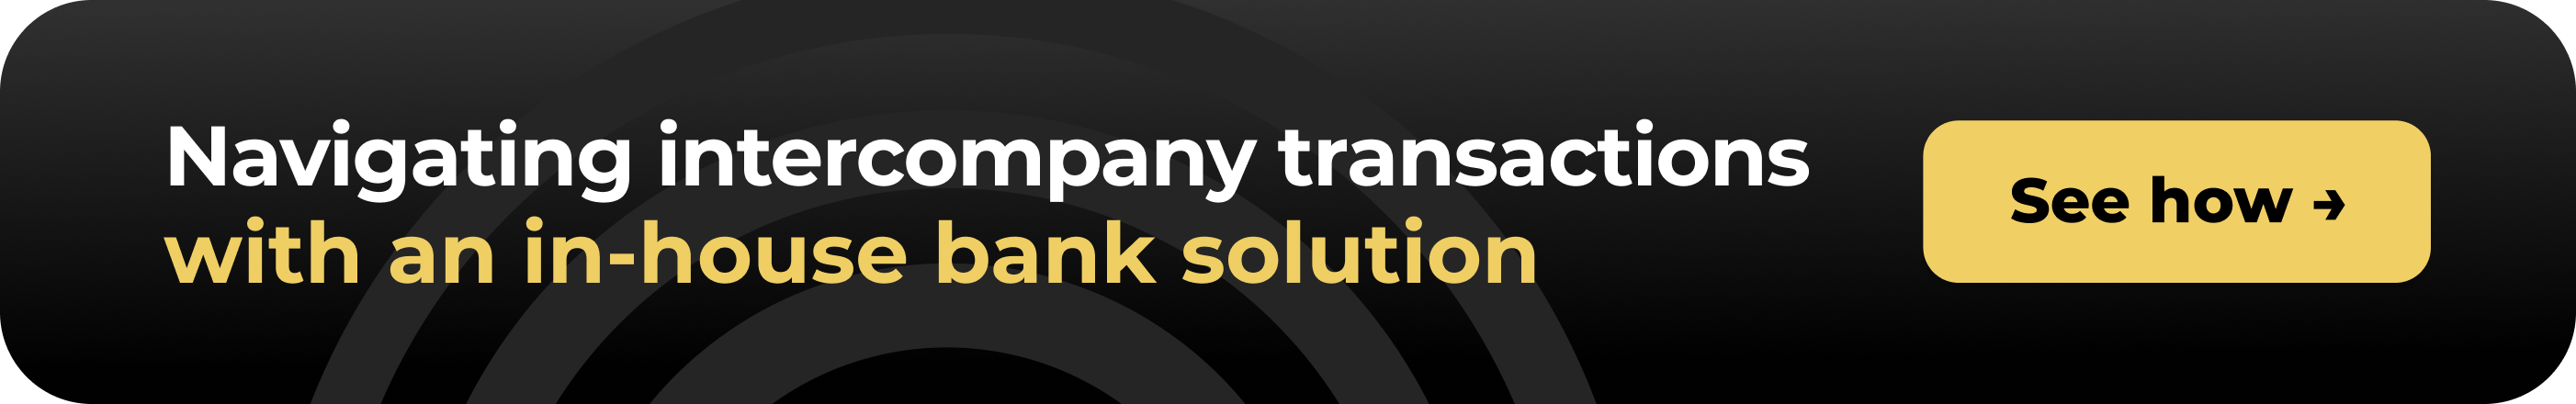 Intercompany transactions learn more banner